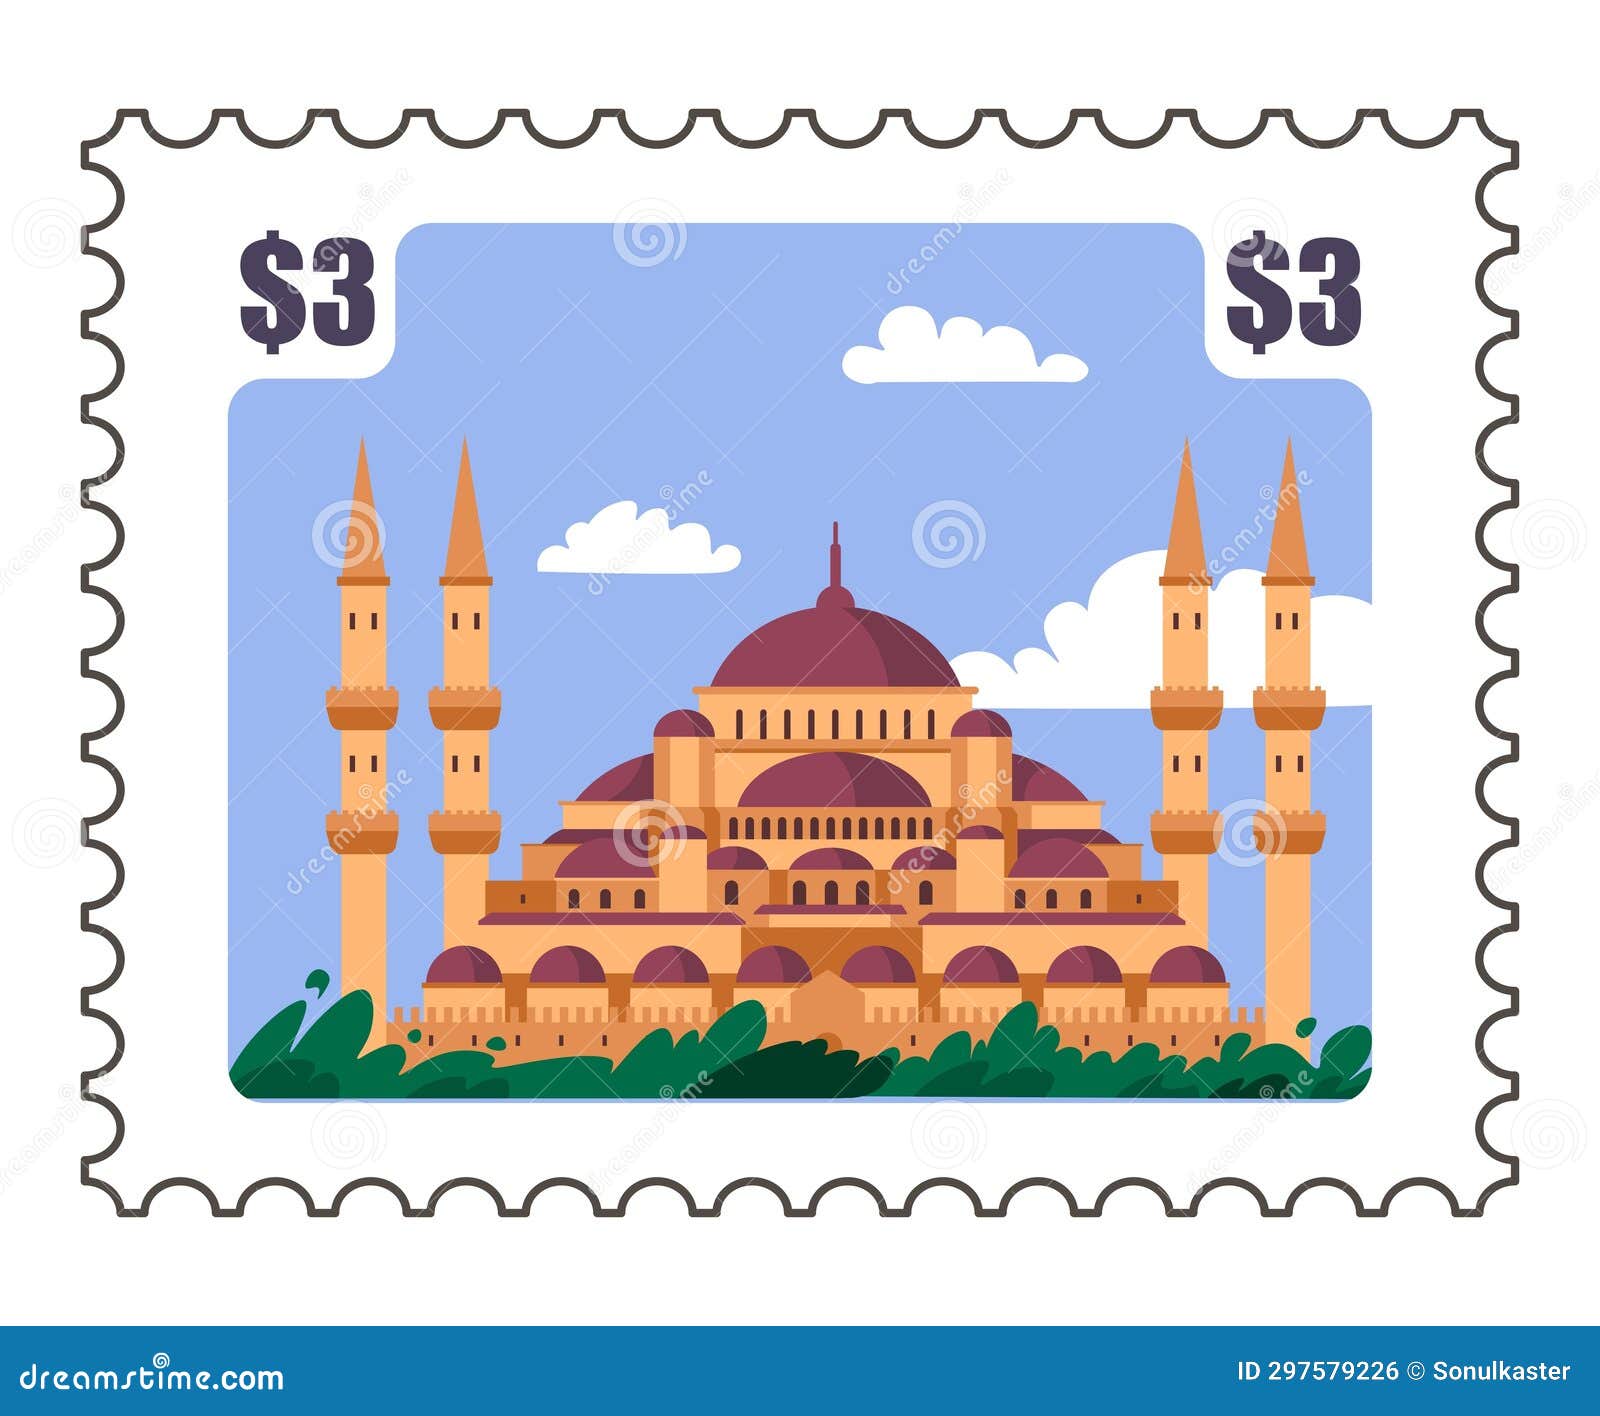 Postal stamps with famous world architecture Vector Image